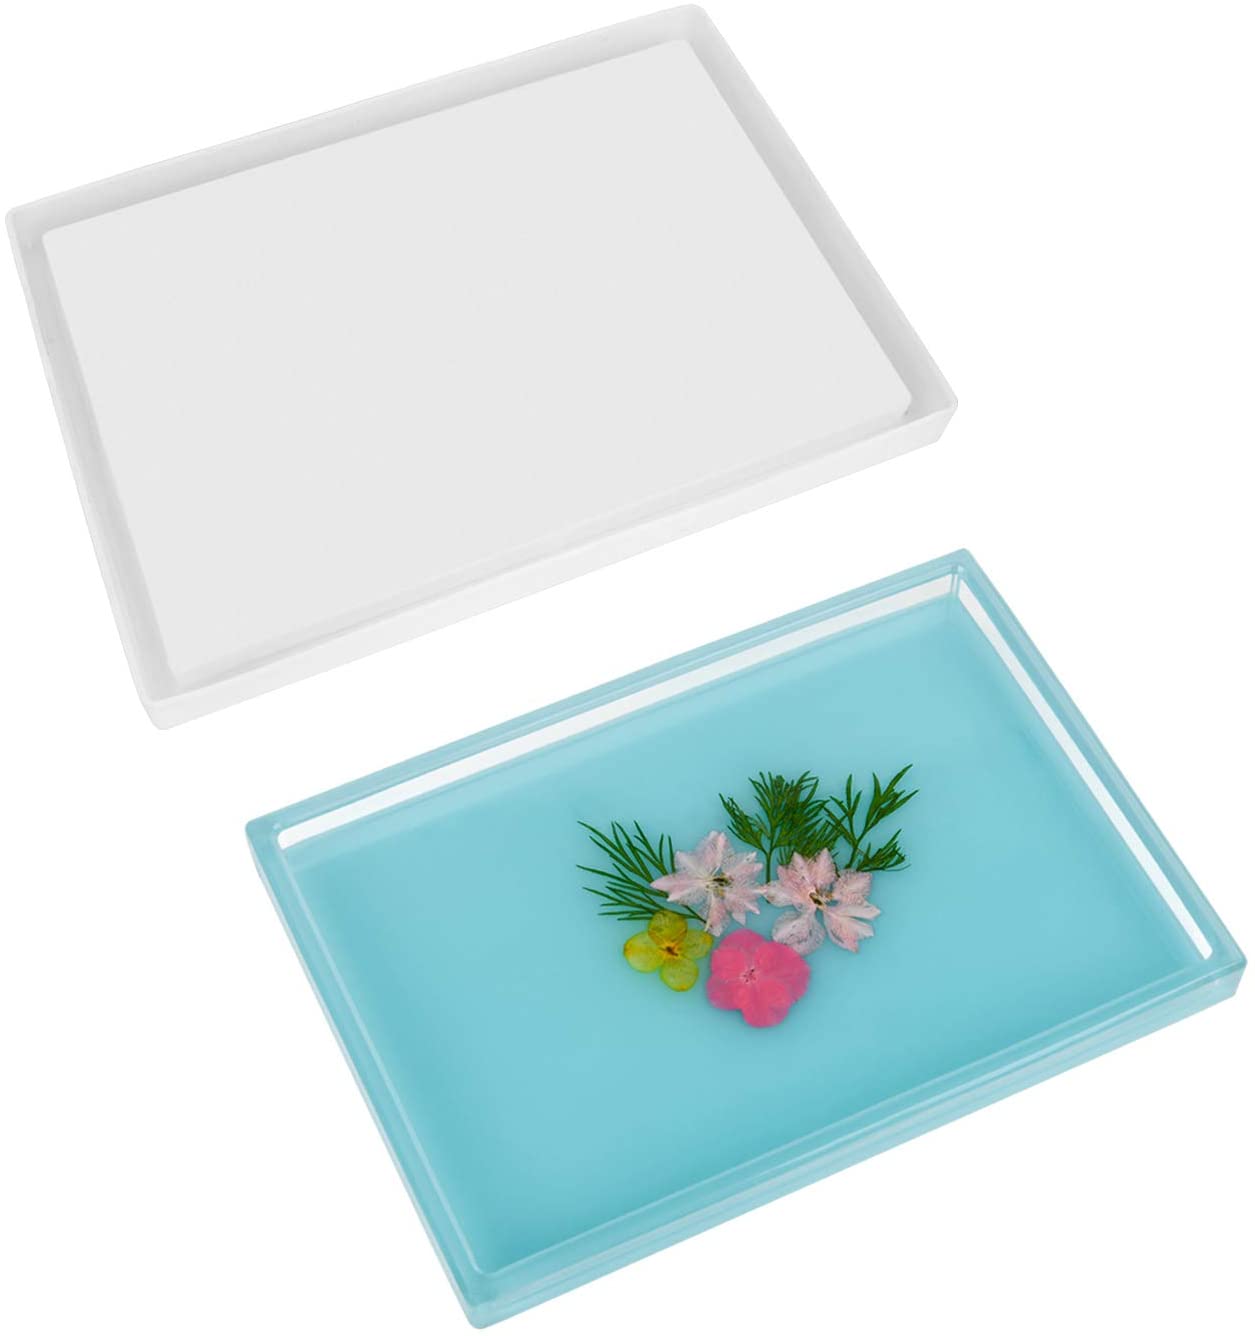 Tray Mold for Resin | CraftsPal